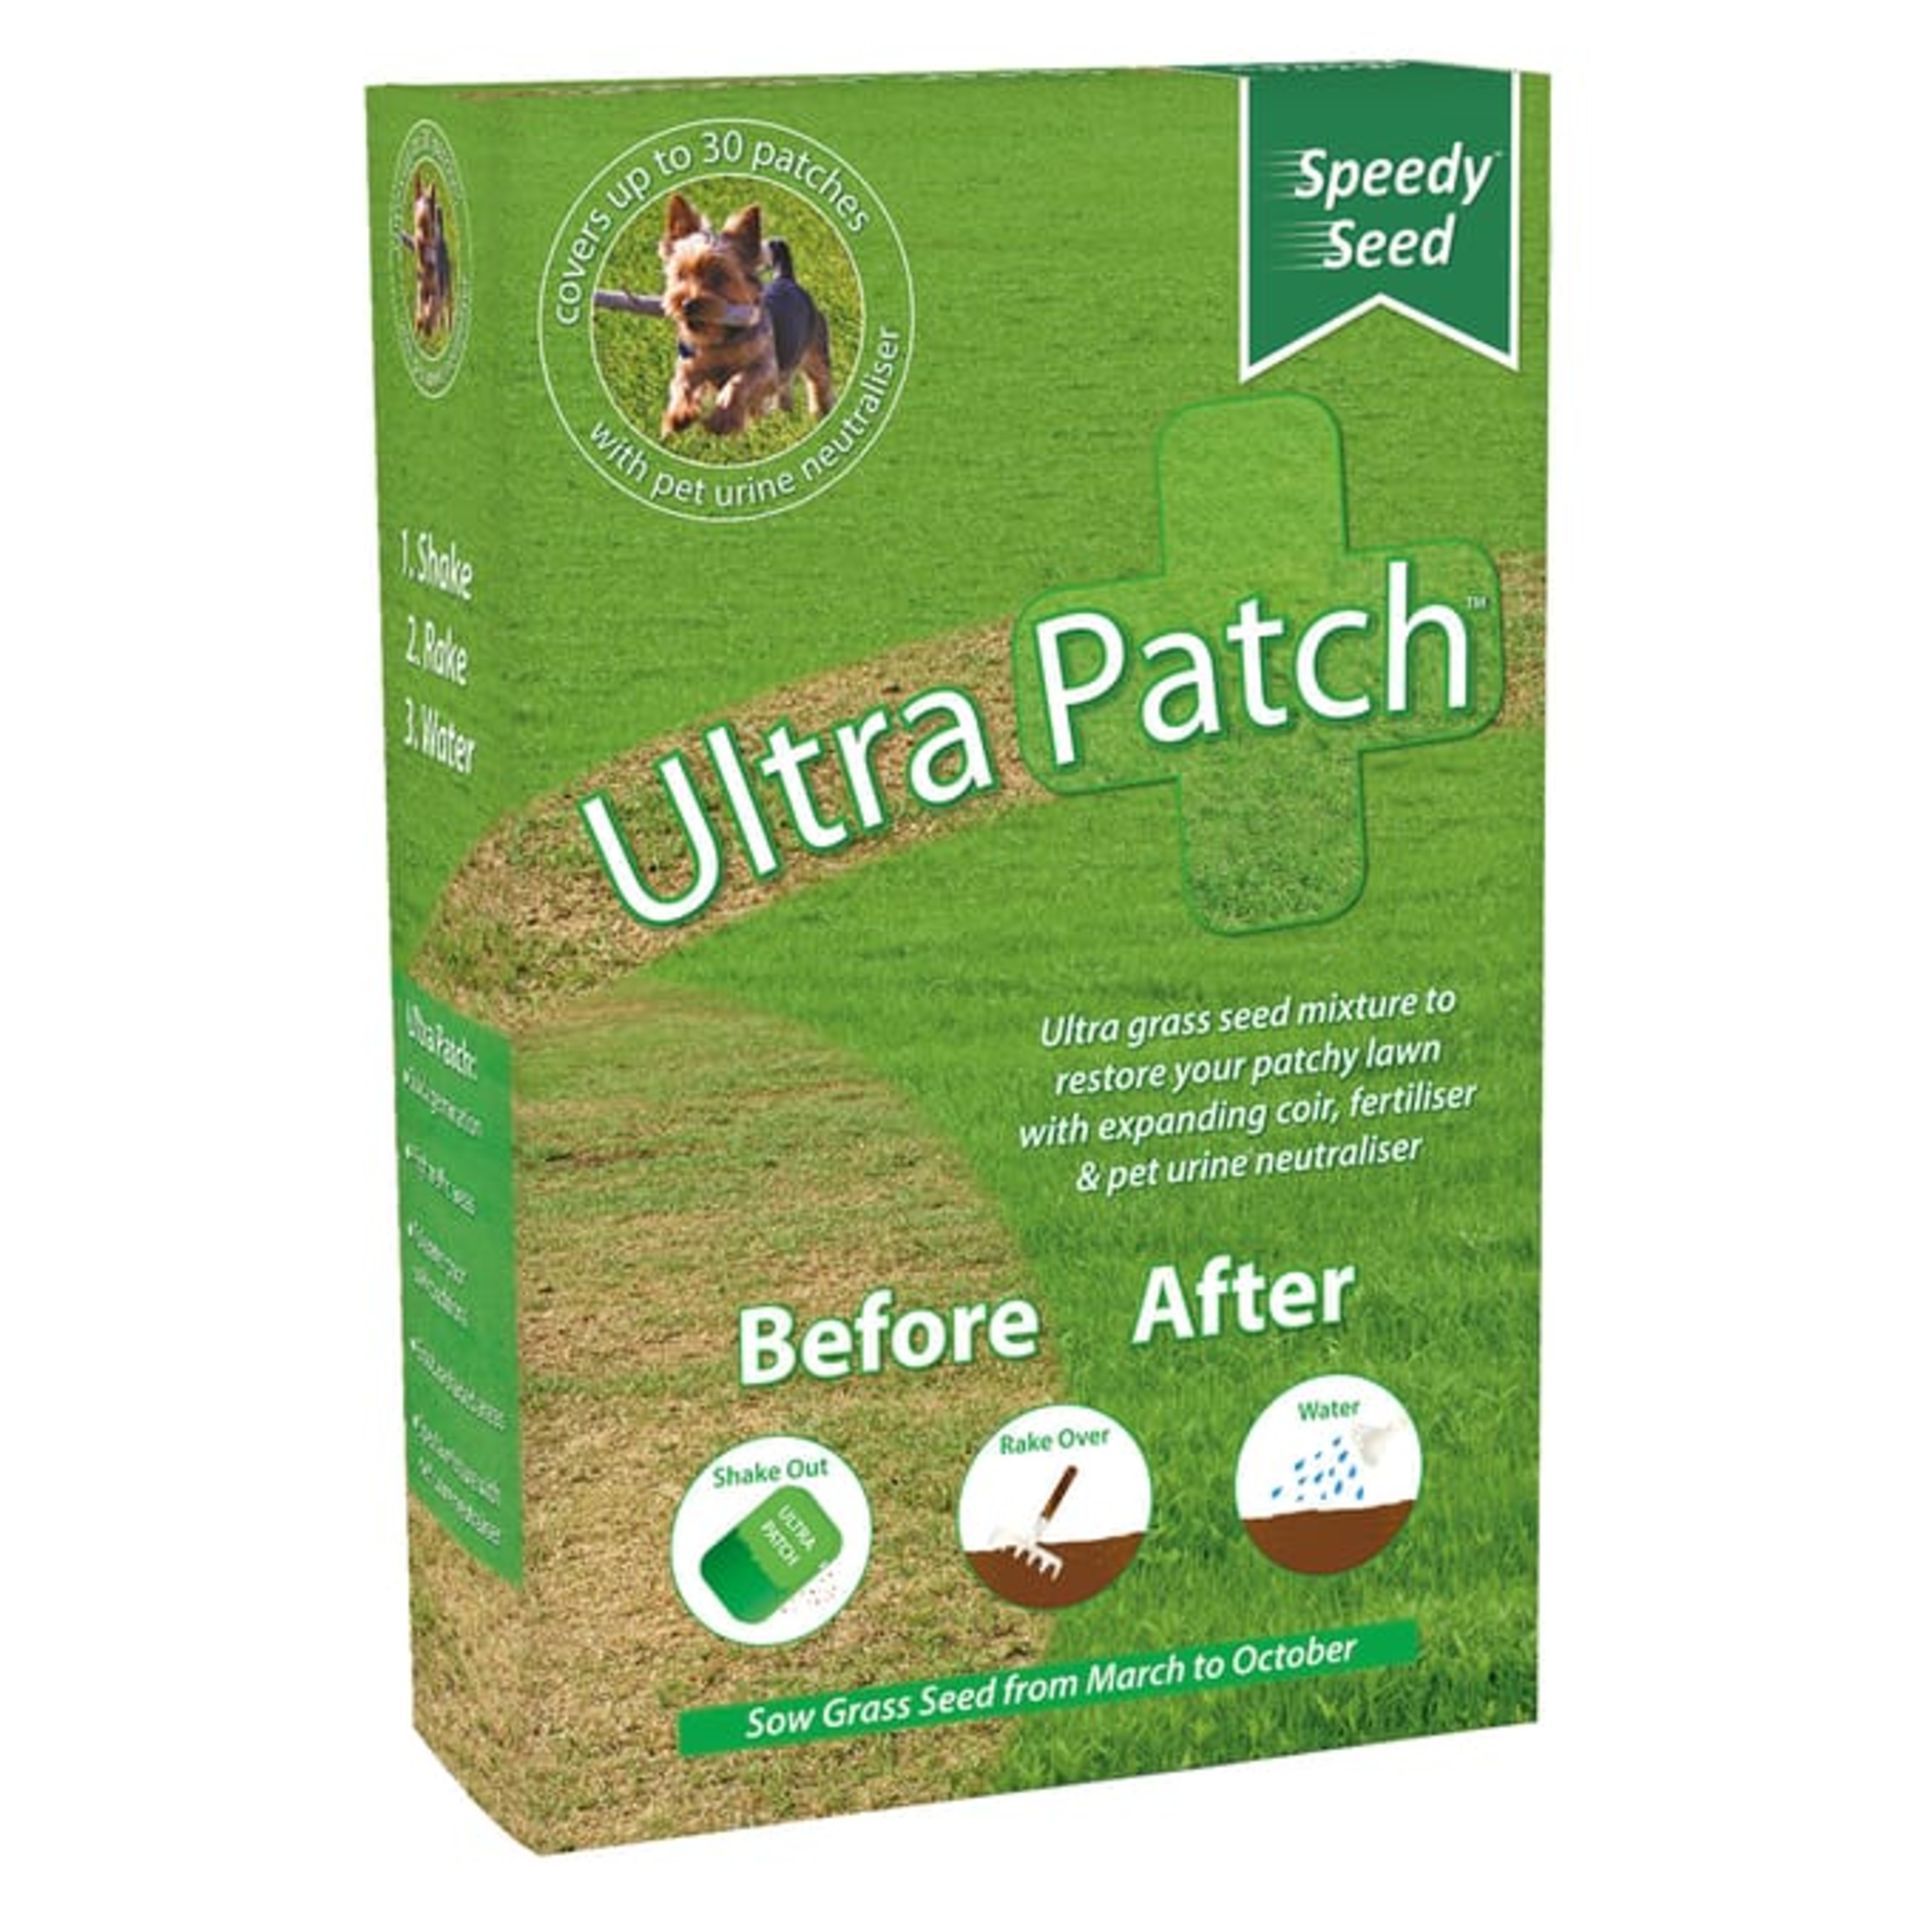 PALLET TO CONTAIN 100 X BRAND NEW SPEEDY SEED ULTRA PATCH GRASS SEED 1.2KG S1RA